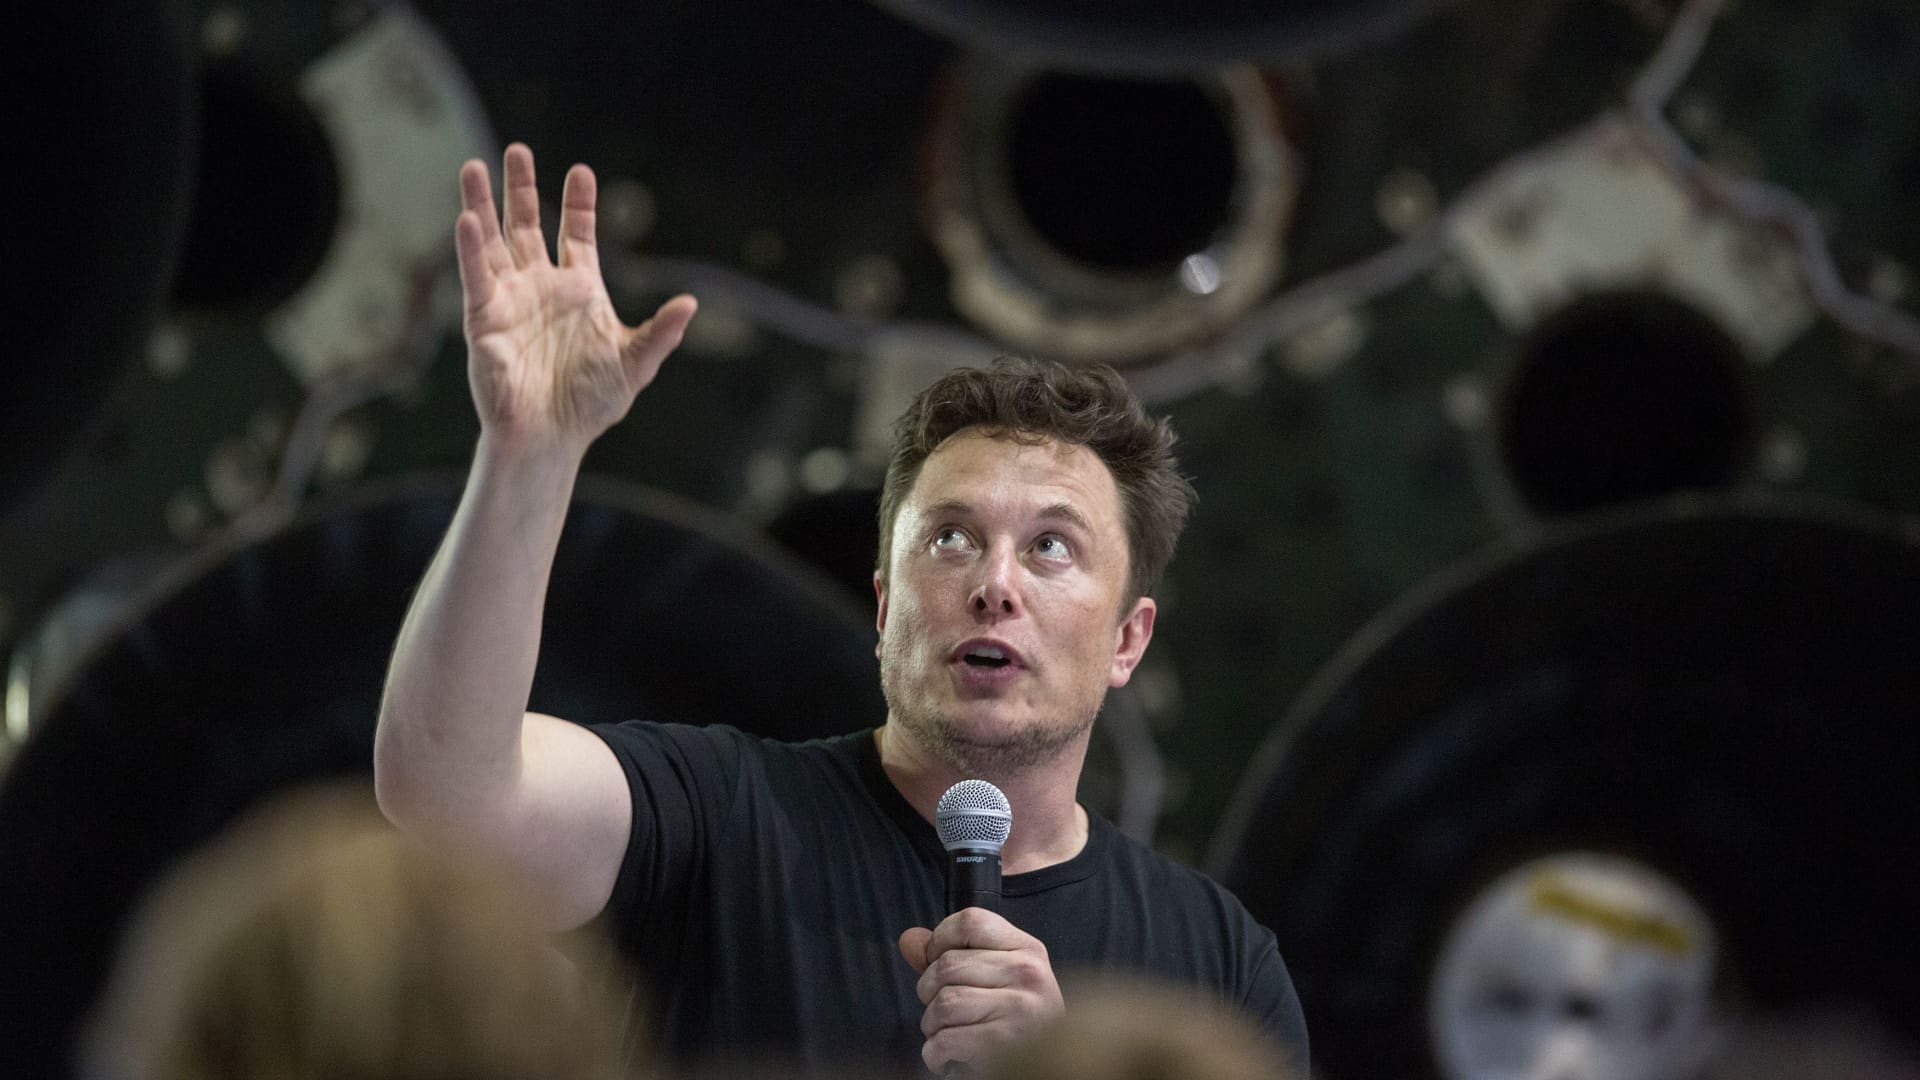 elon-musk-testifies-he-would-have-sold-spacex-stock-to-take-tesla-private-in-2018